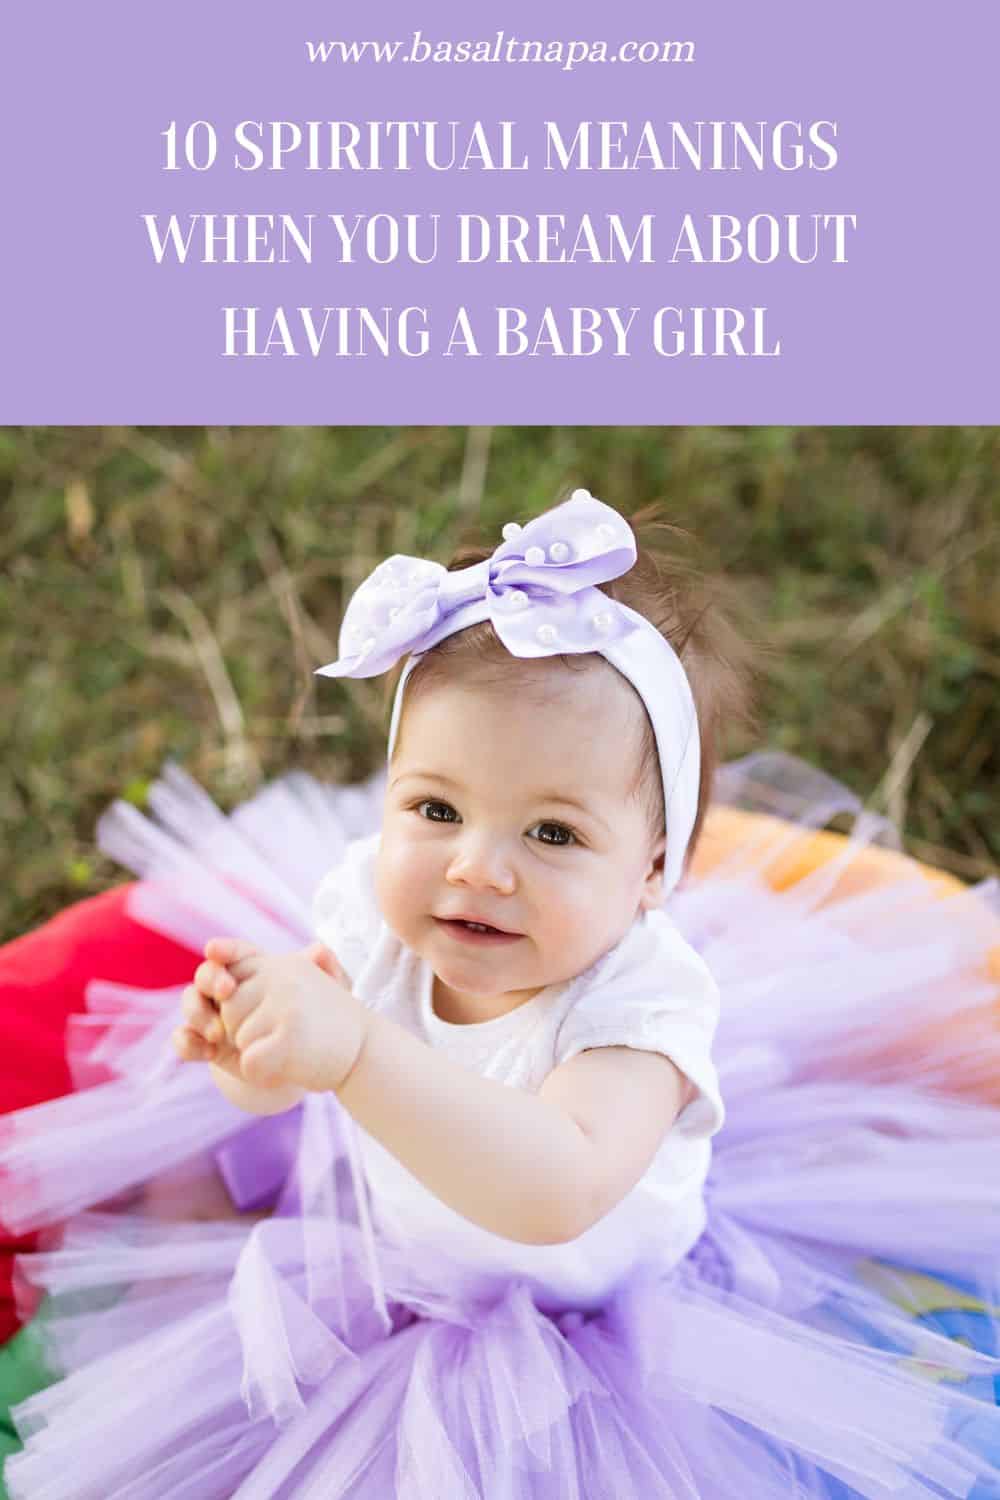 What Does It Mean When You Dream About Having A Baby Girl?